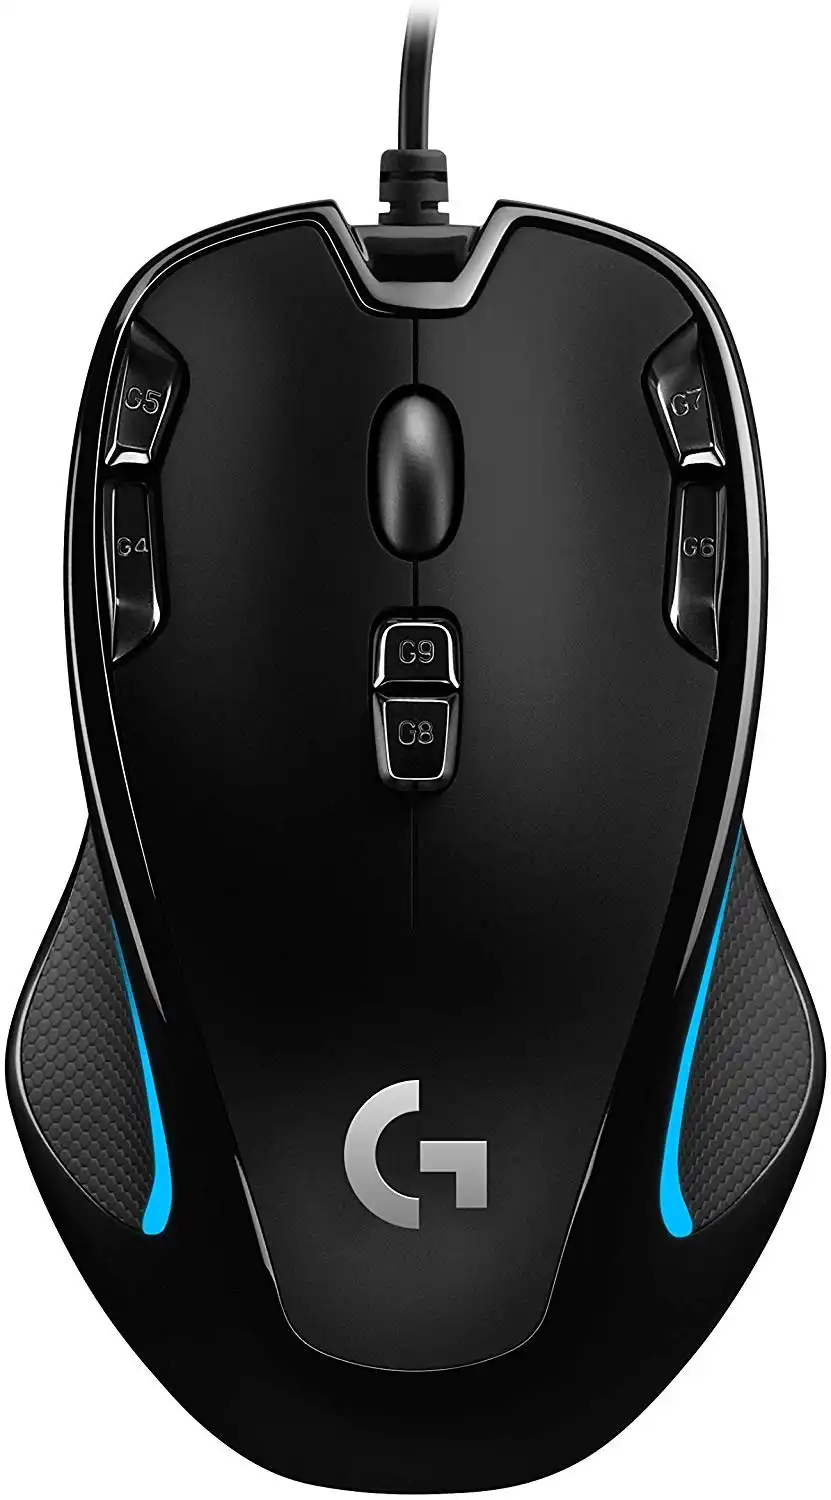 Logitech Optical Gaming Mouse G300s